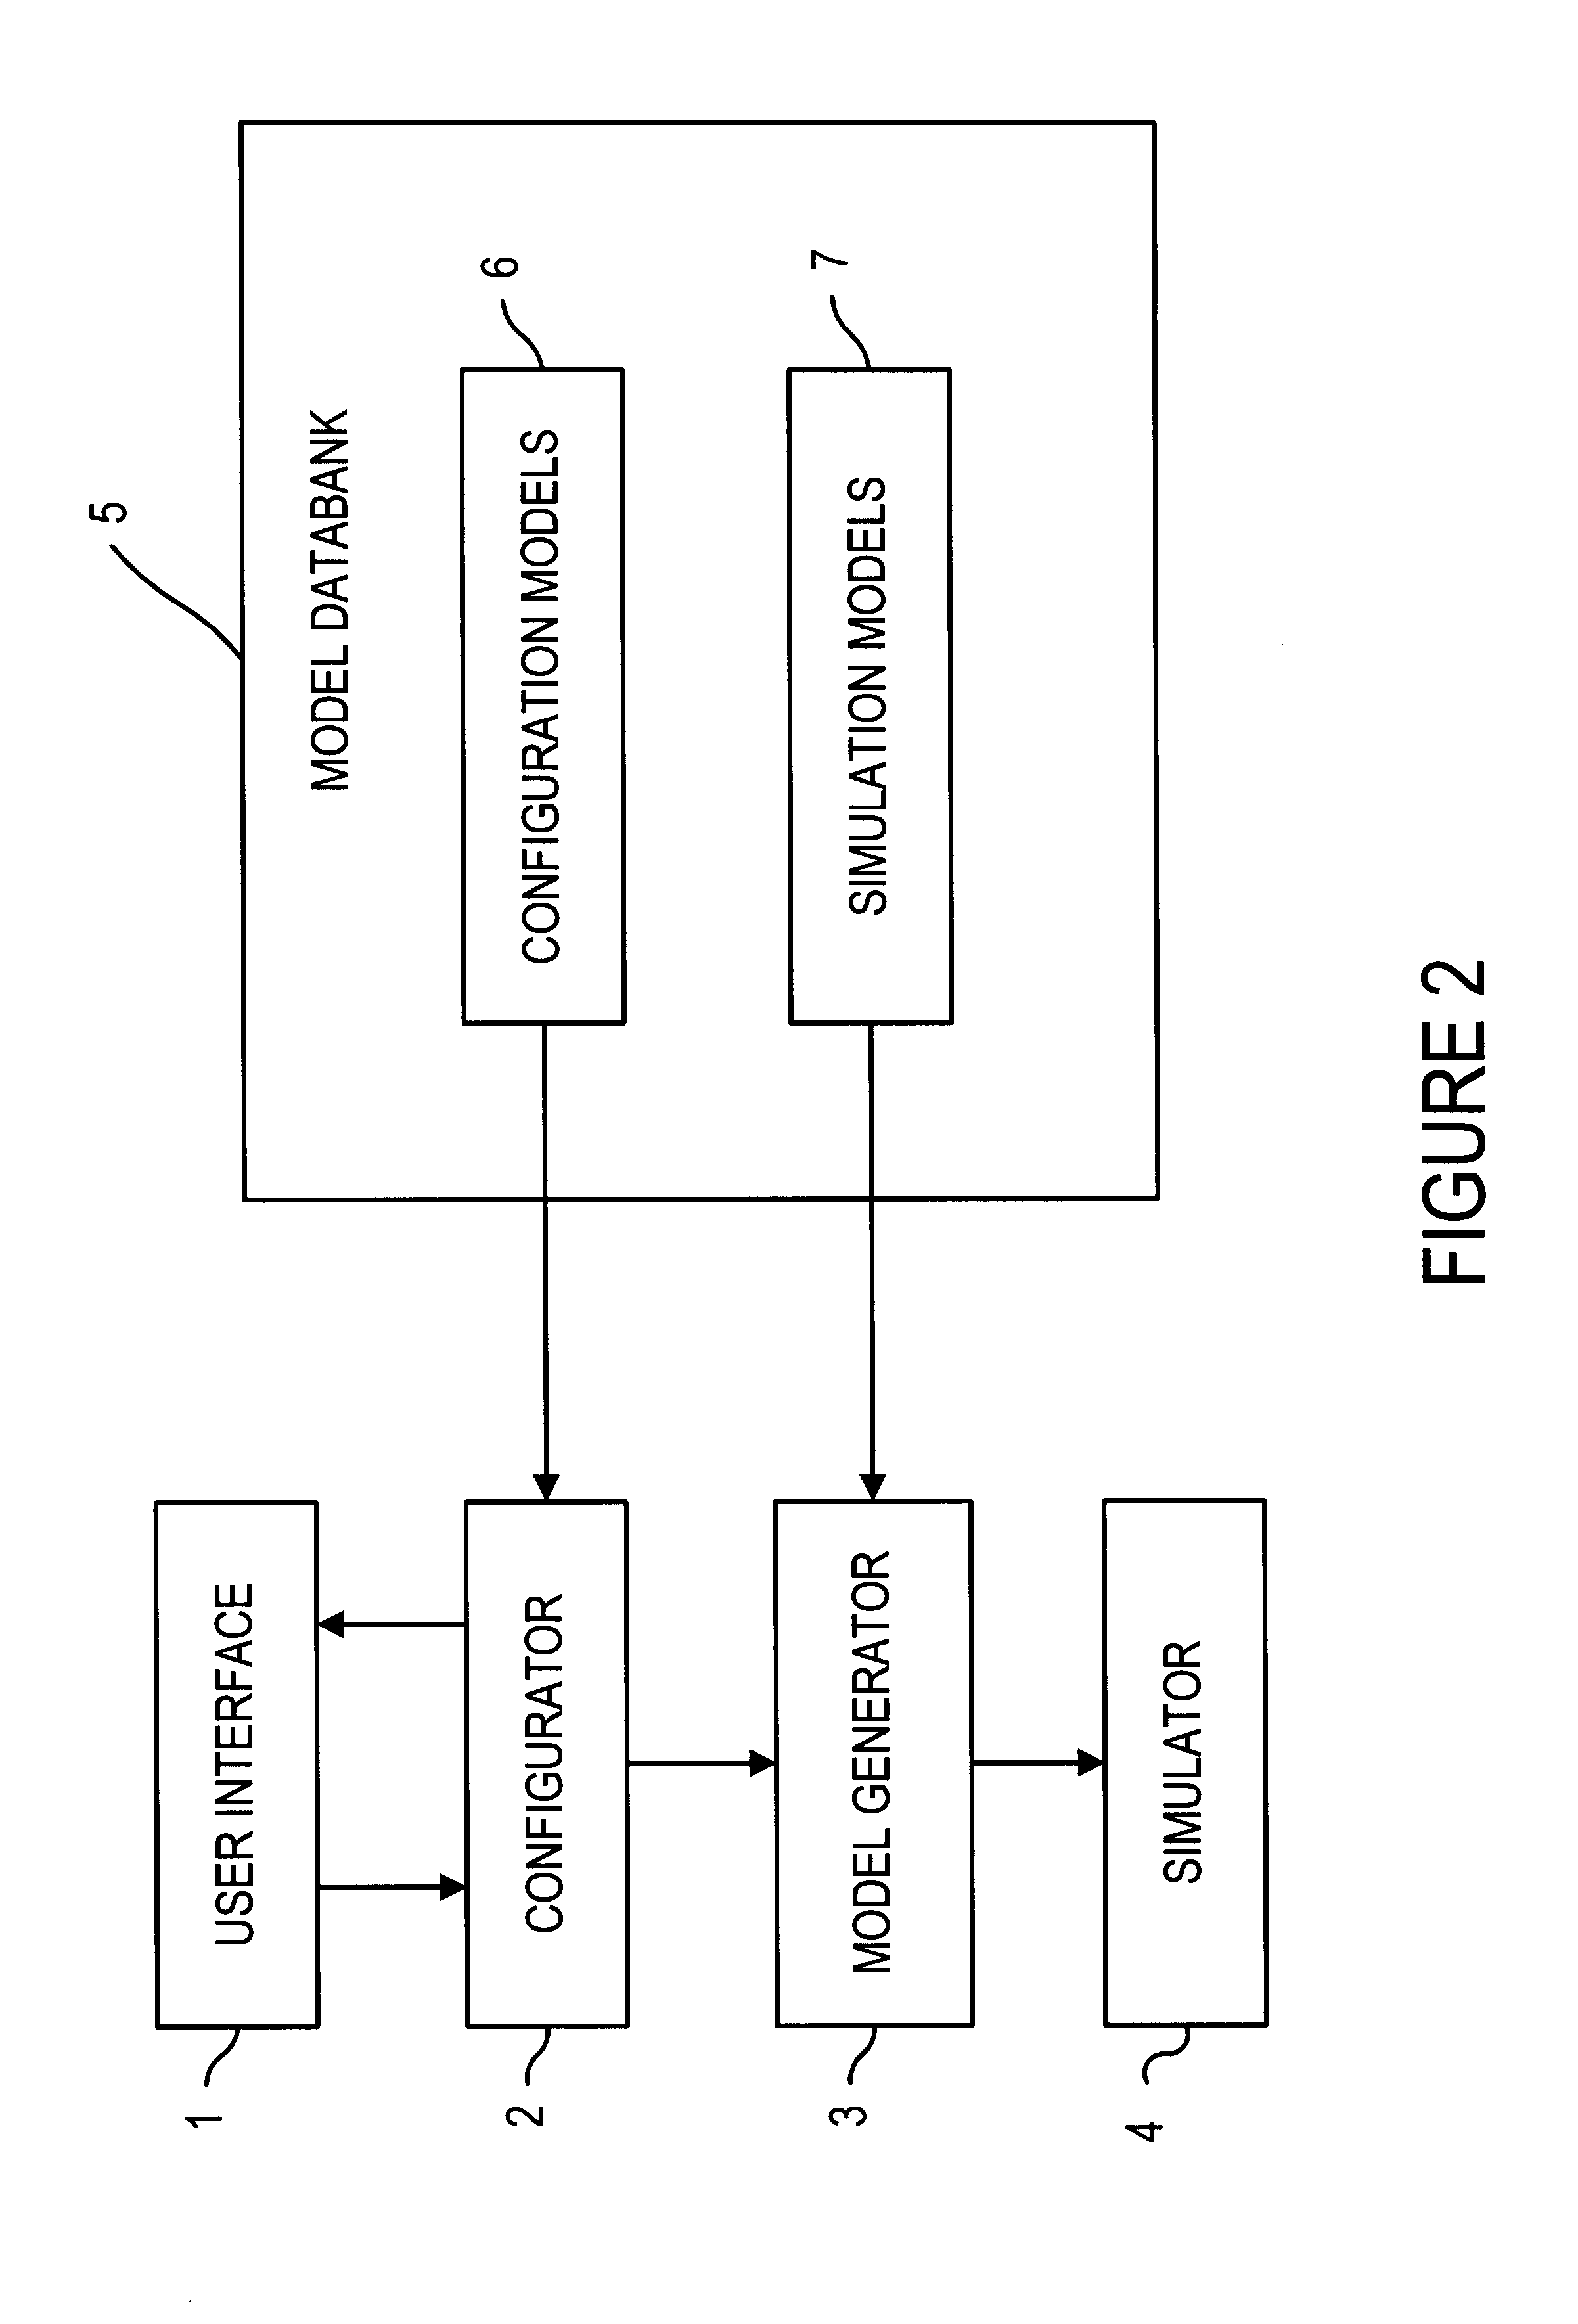 Configuration of a part of an electrical power distribution network